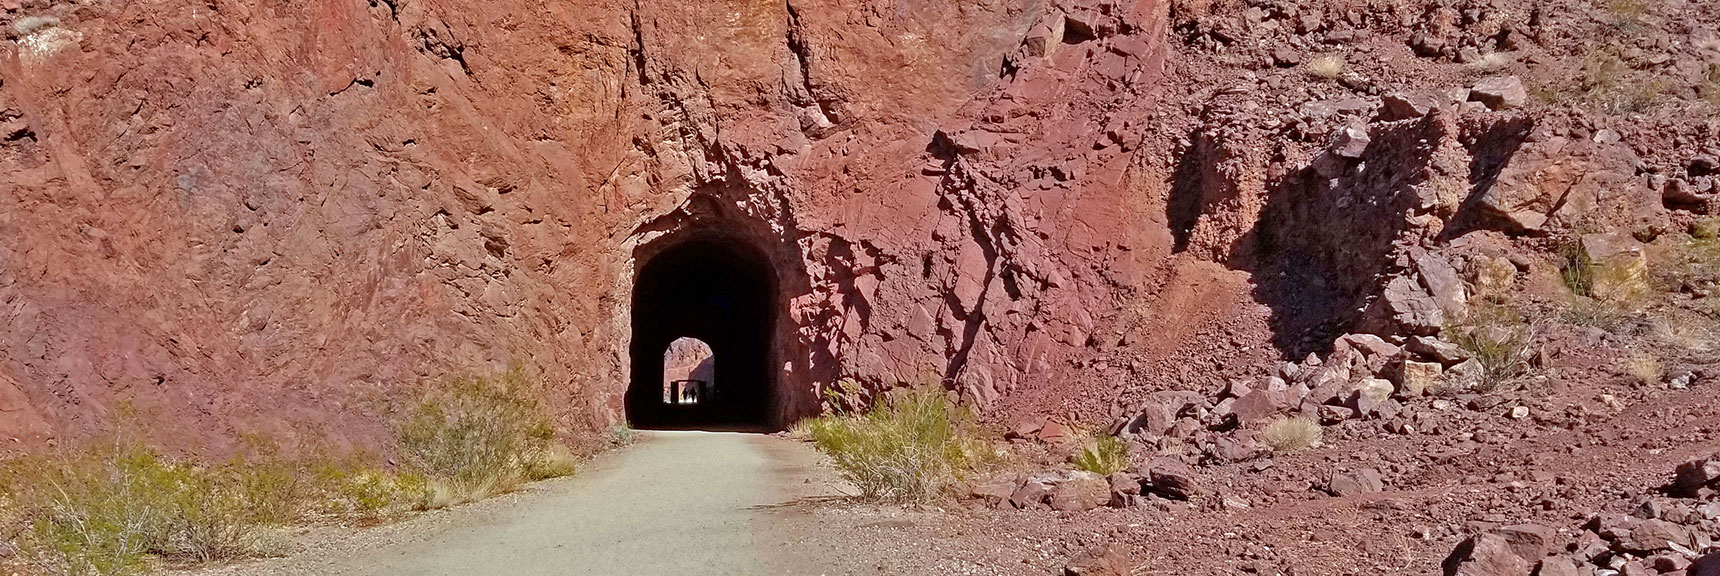 Tunnels #2 and 3 | Historic Railroad Trail | Lake Mead National Recreation Area, Nevada